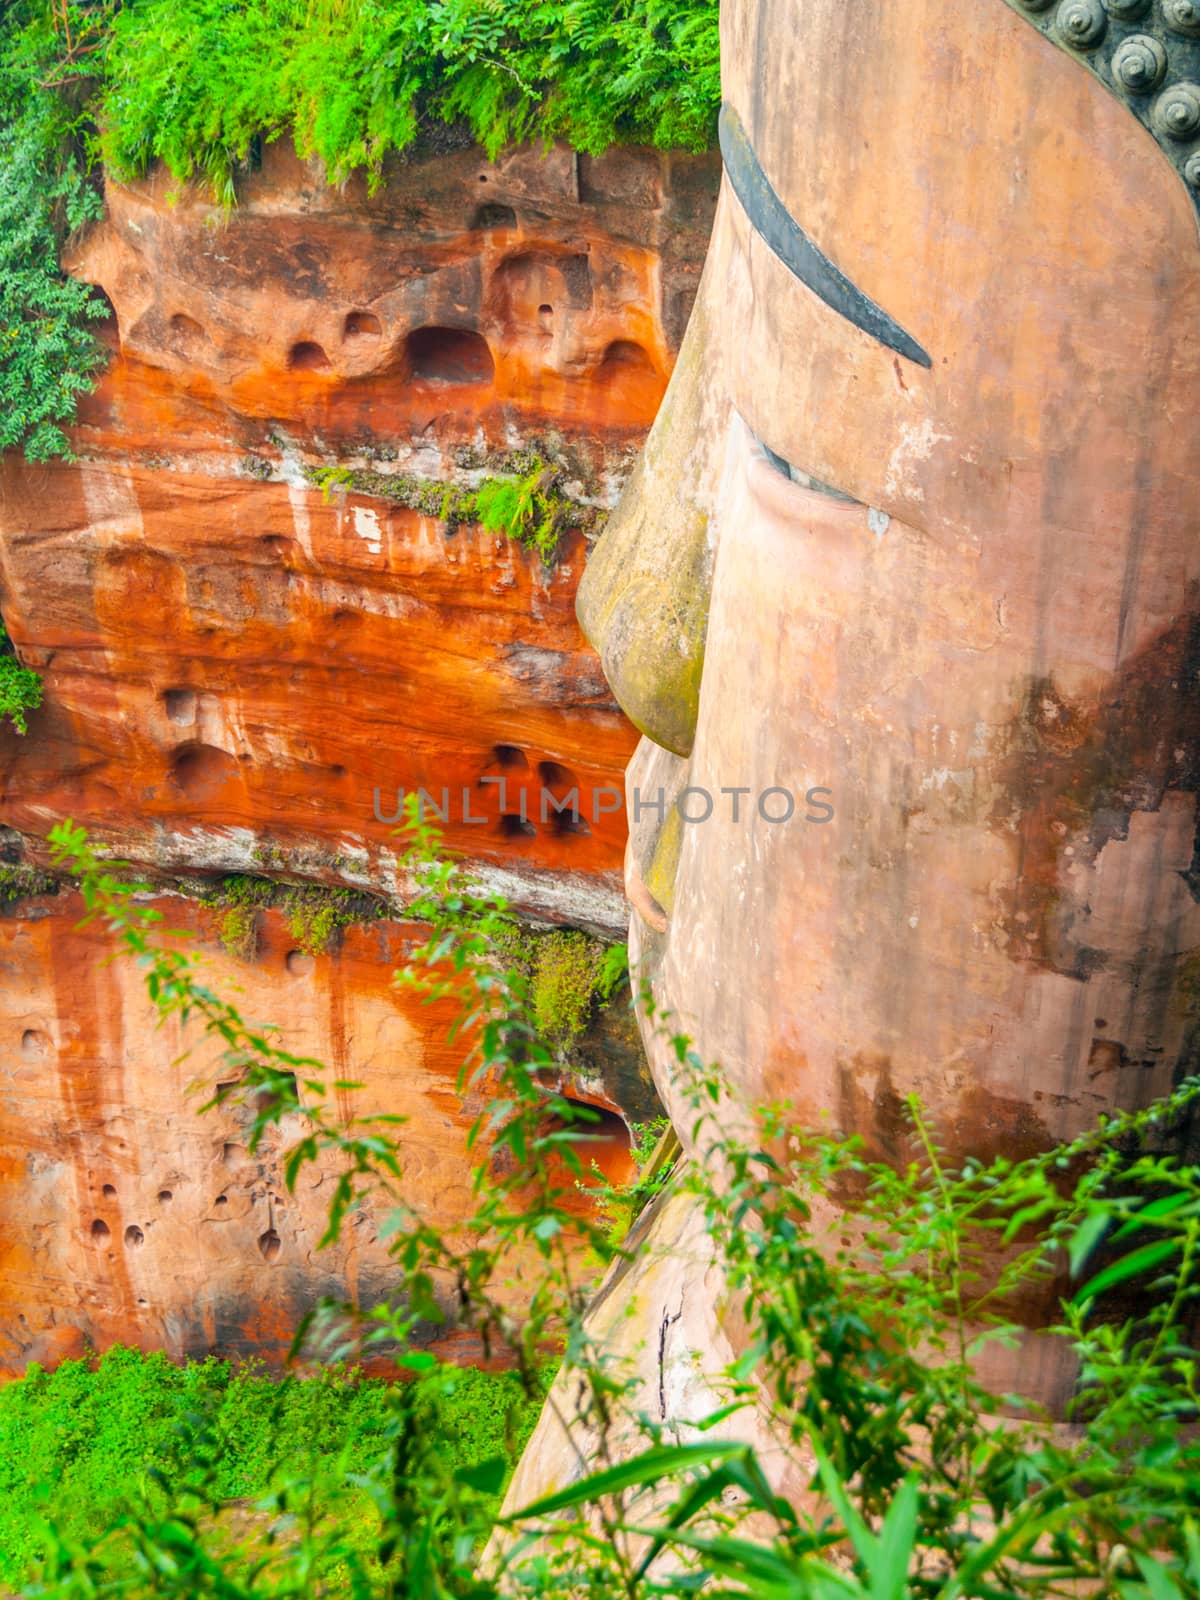 Close-up view of Dafo - Giant Buddha statue in Leshan, Sichuan Province, China by pyty